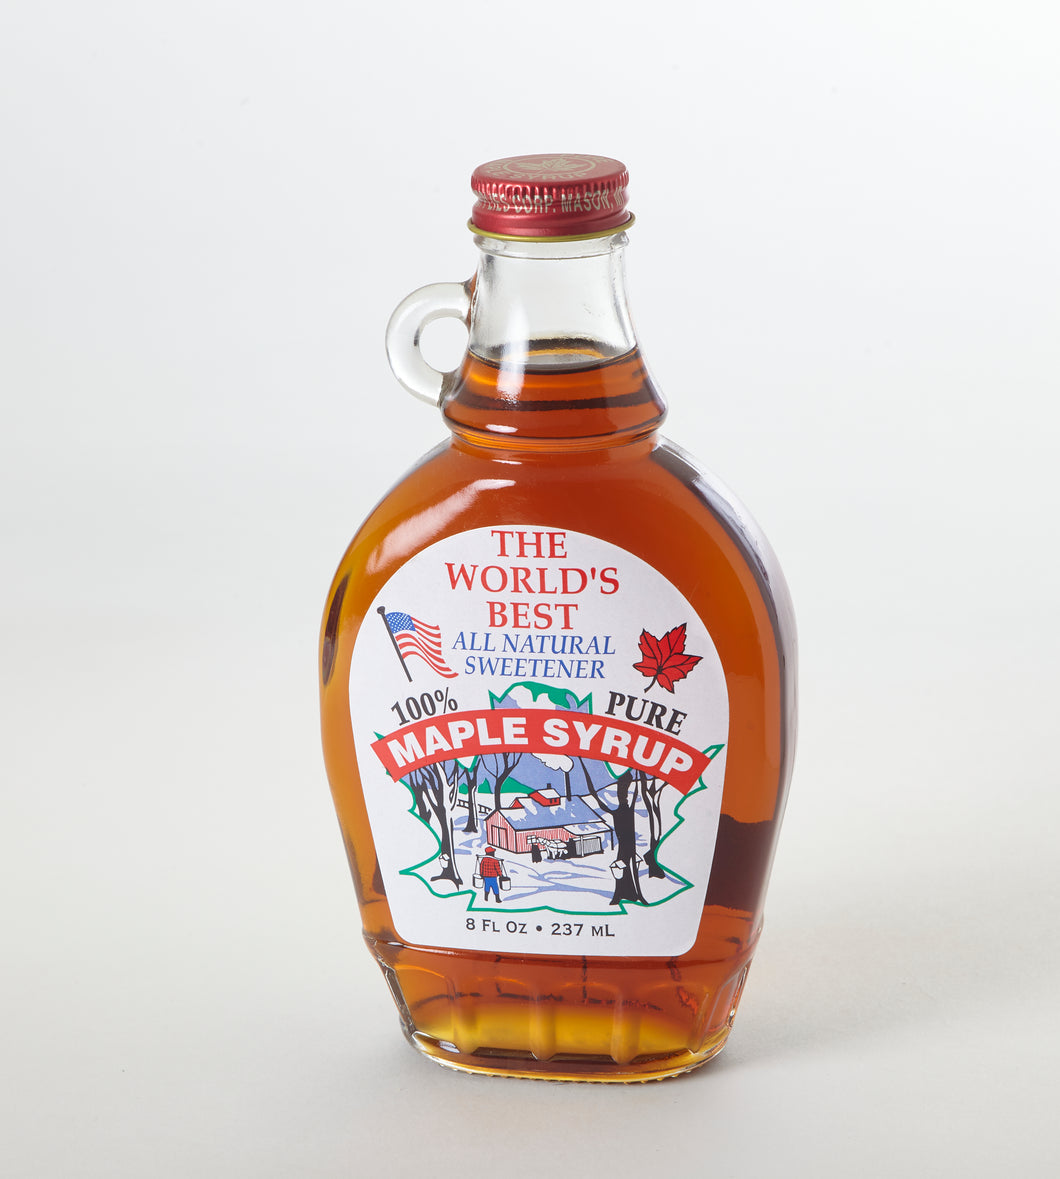 New York State Pure Maple Syrup